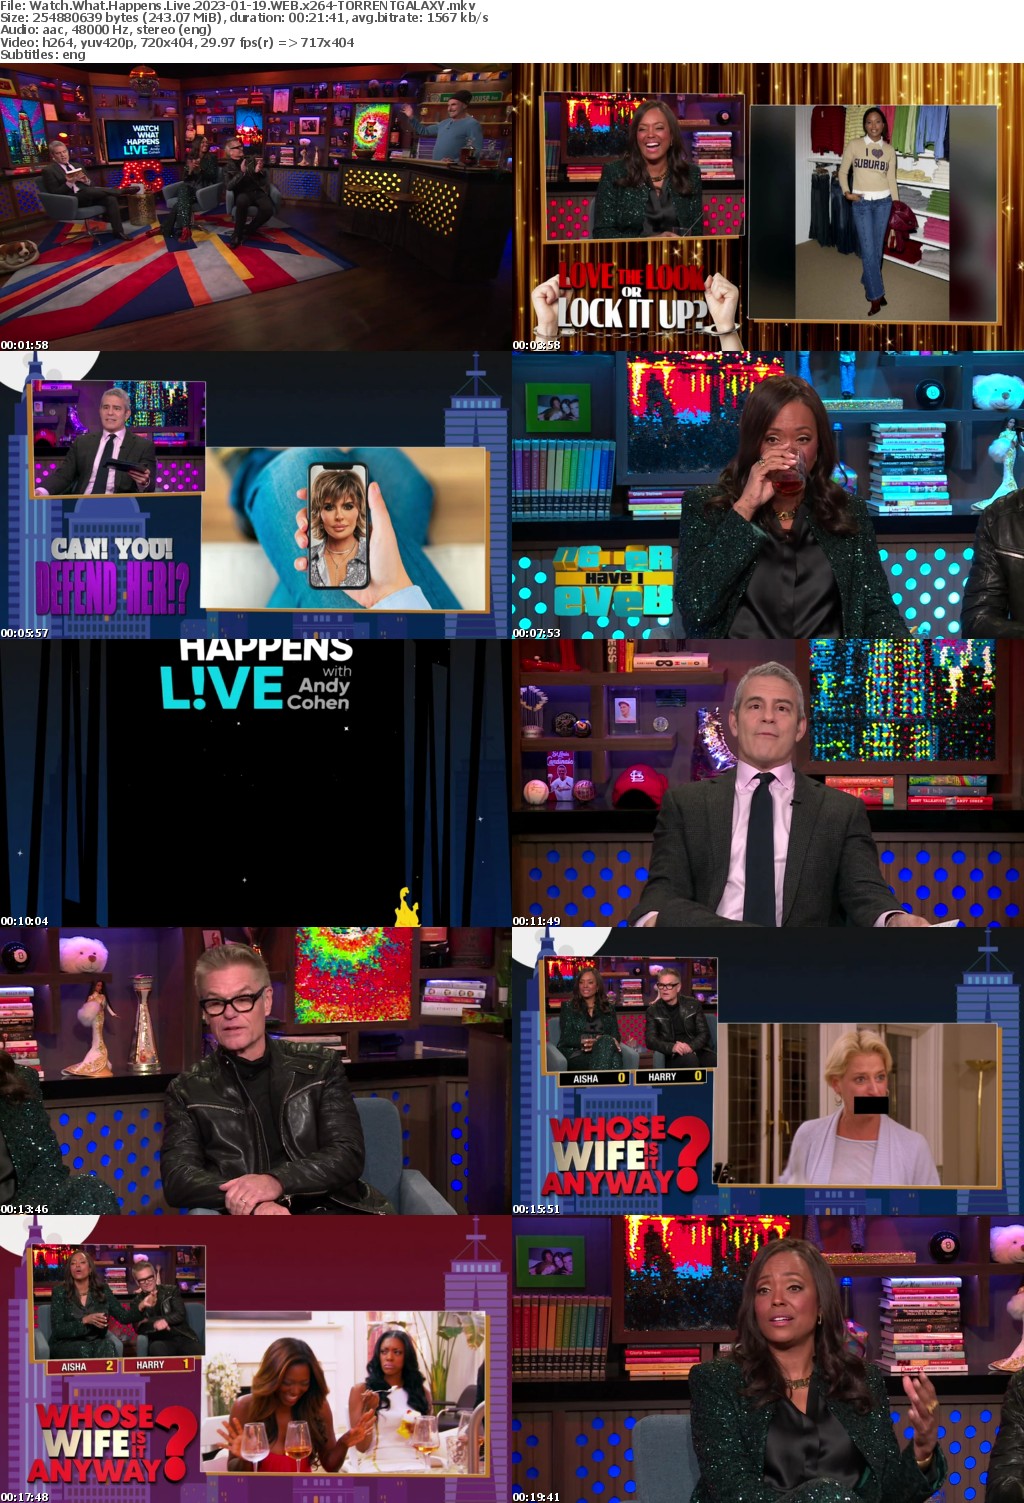 Watch What Happens Live 2023-01-19 WEB x264-GALAXY